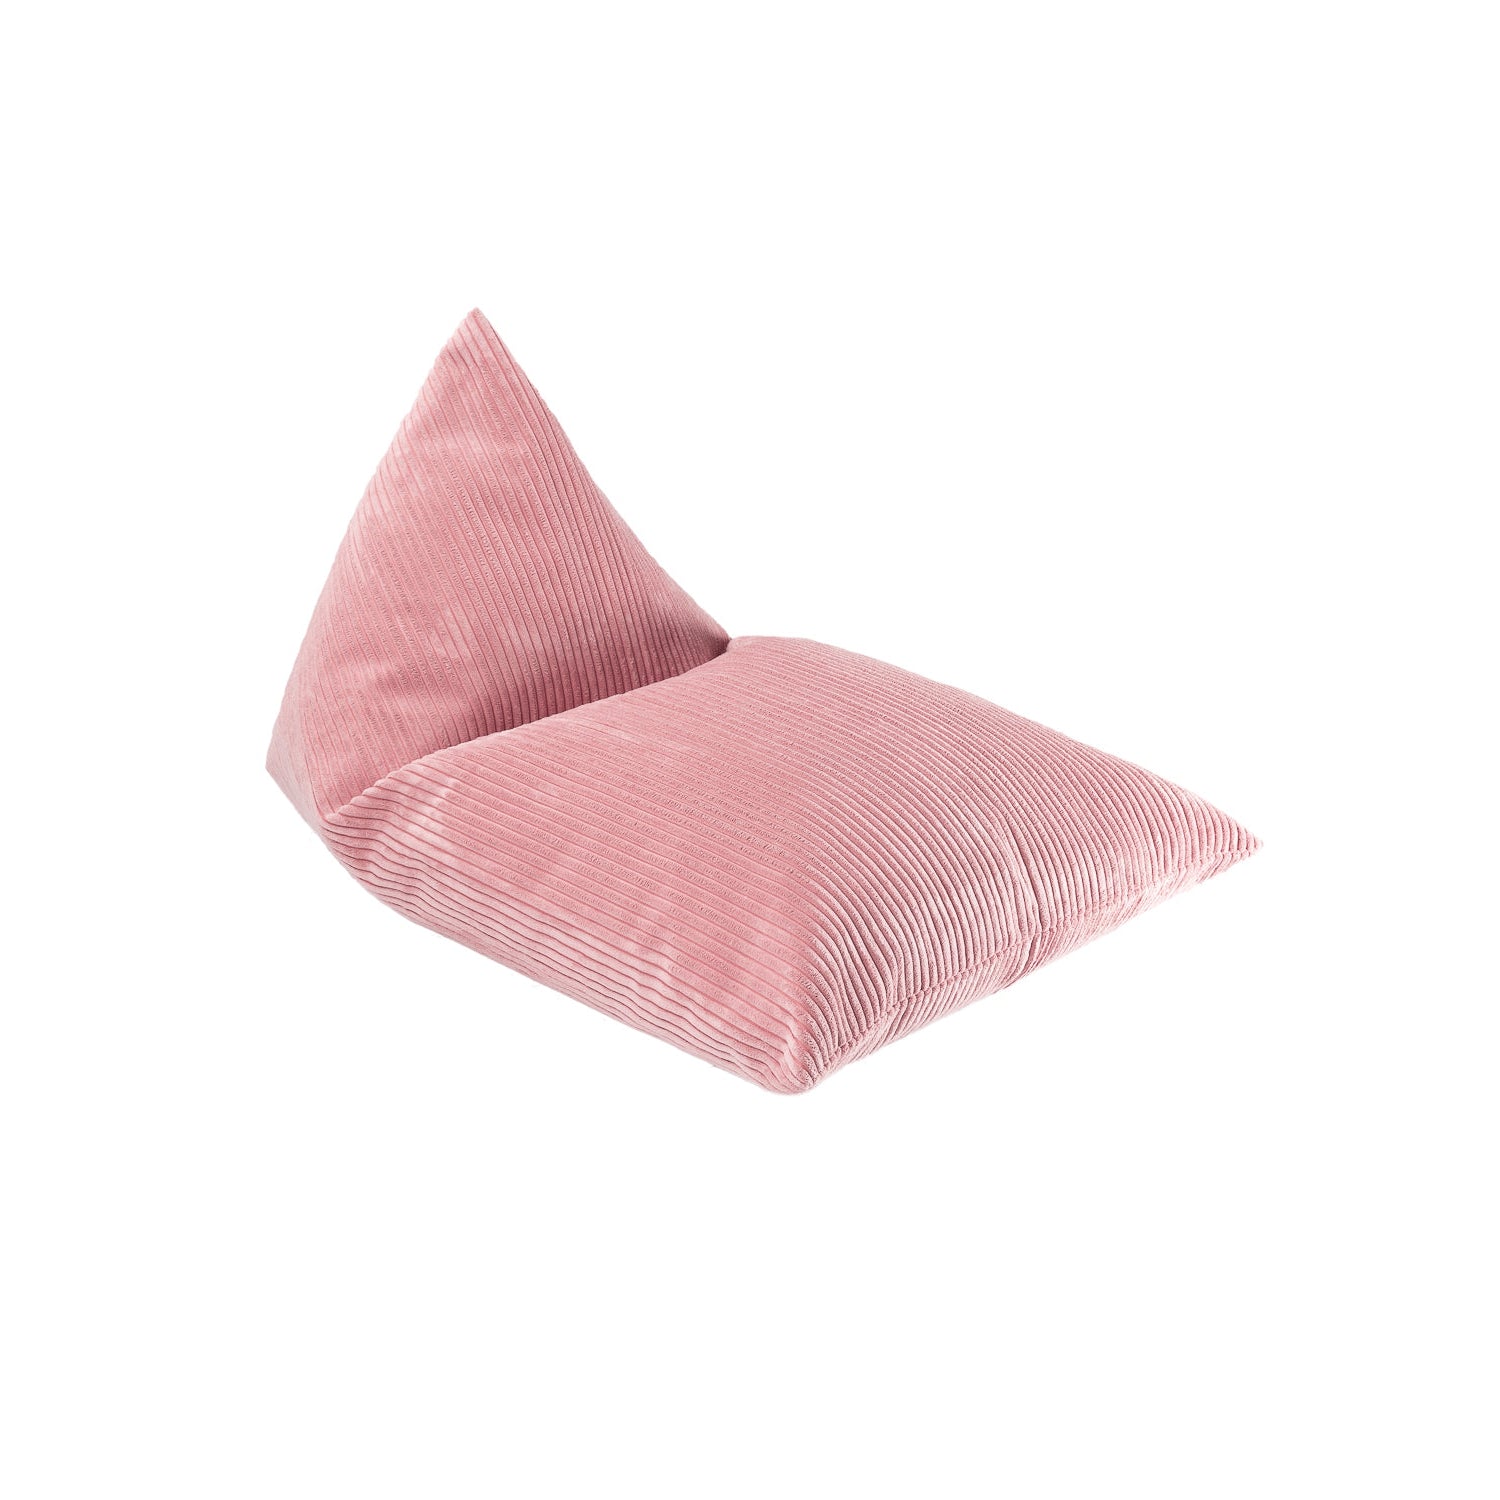 Wigiwama Pink Mousse Big Lounger at Rugs by Roo